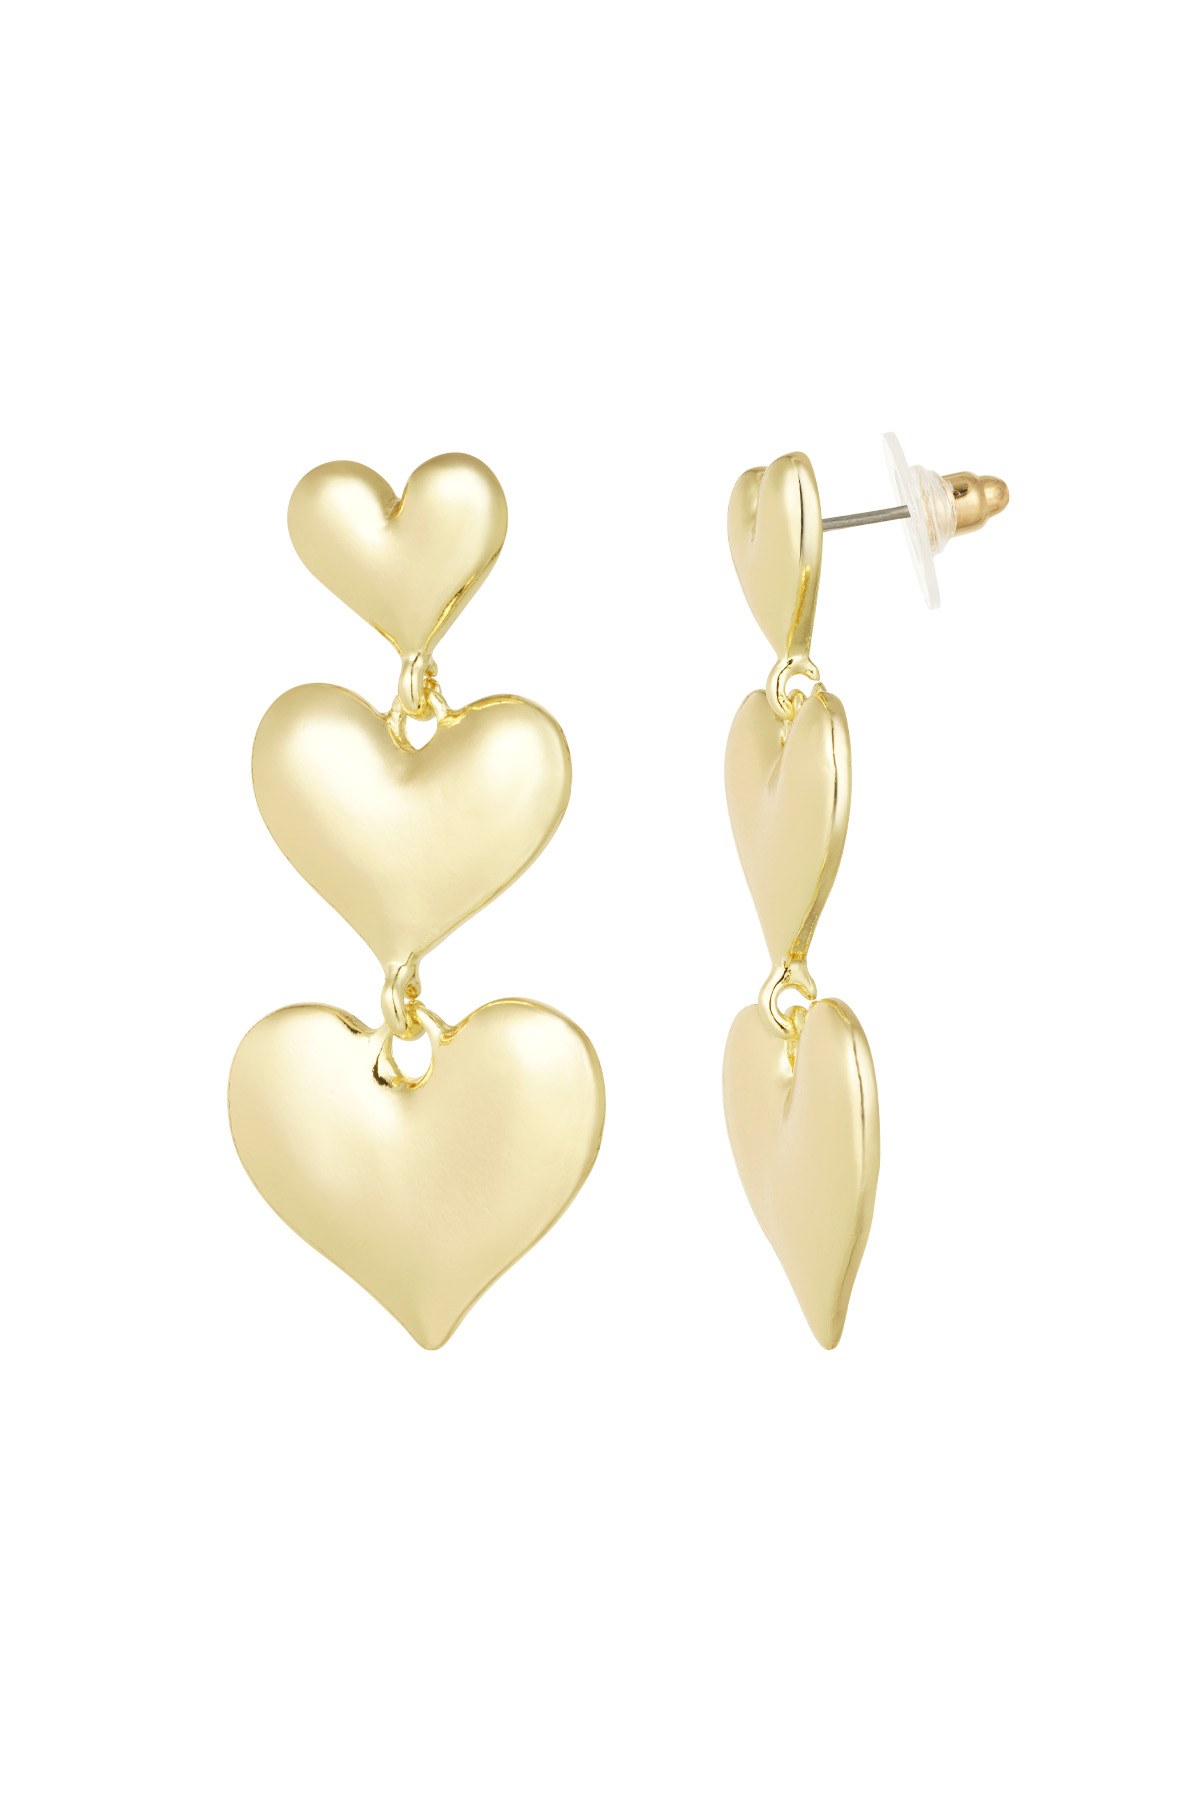 Three hearts hanging earrings - gold 